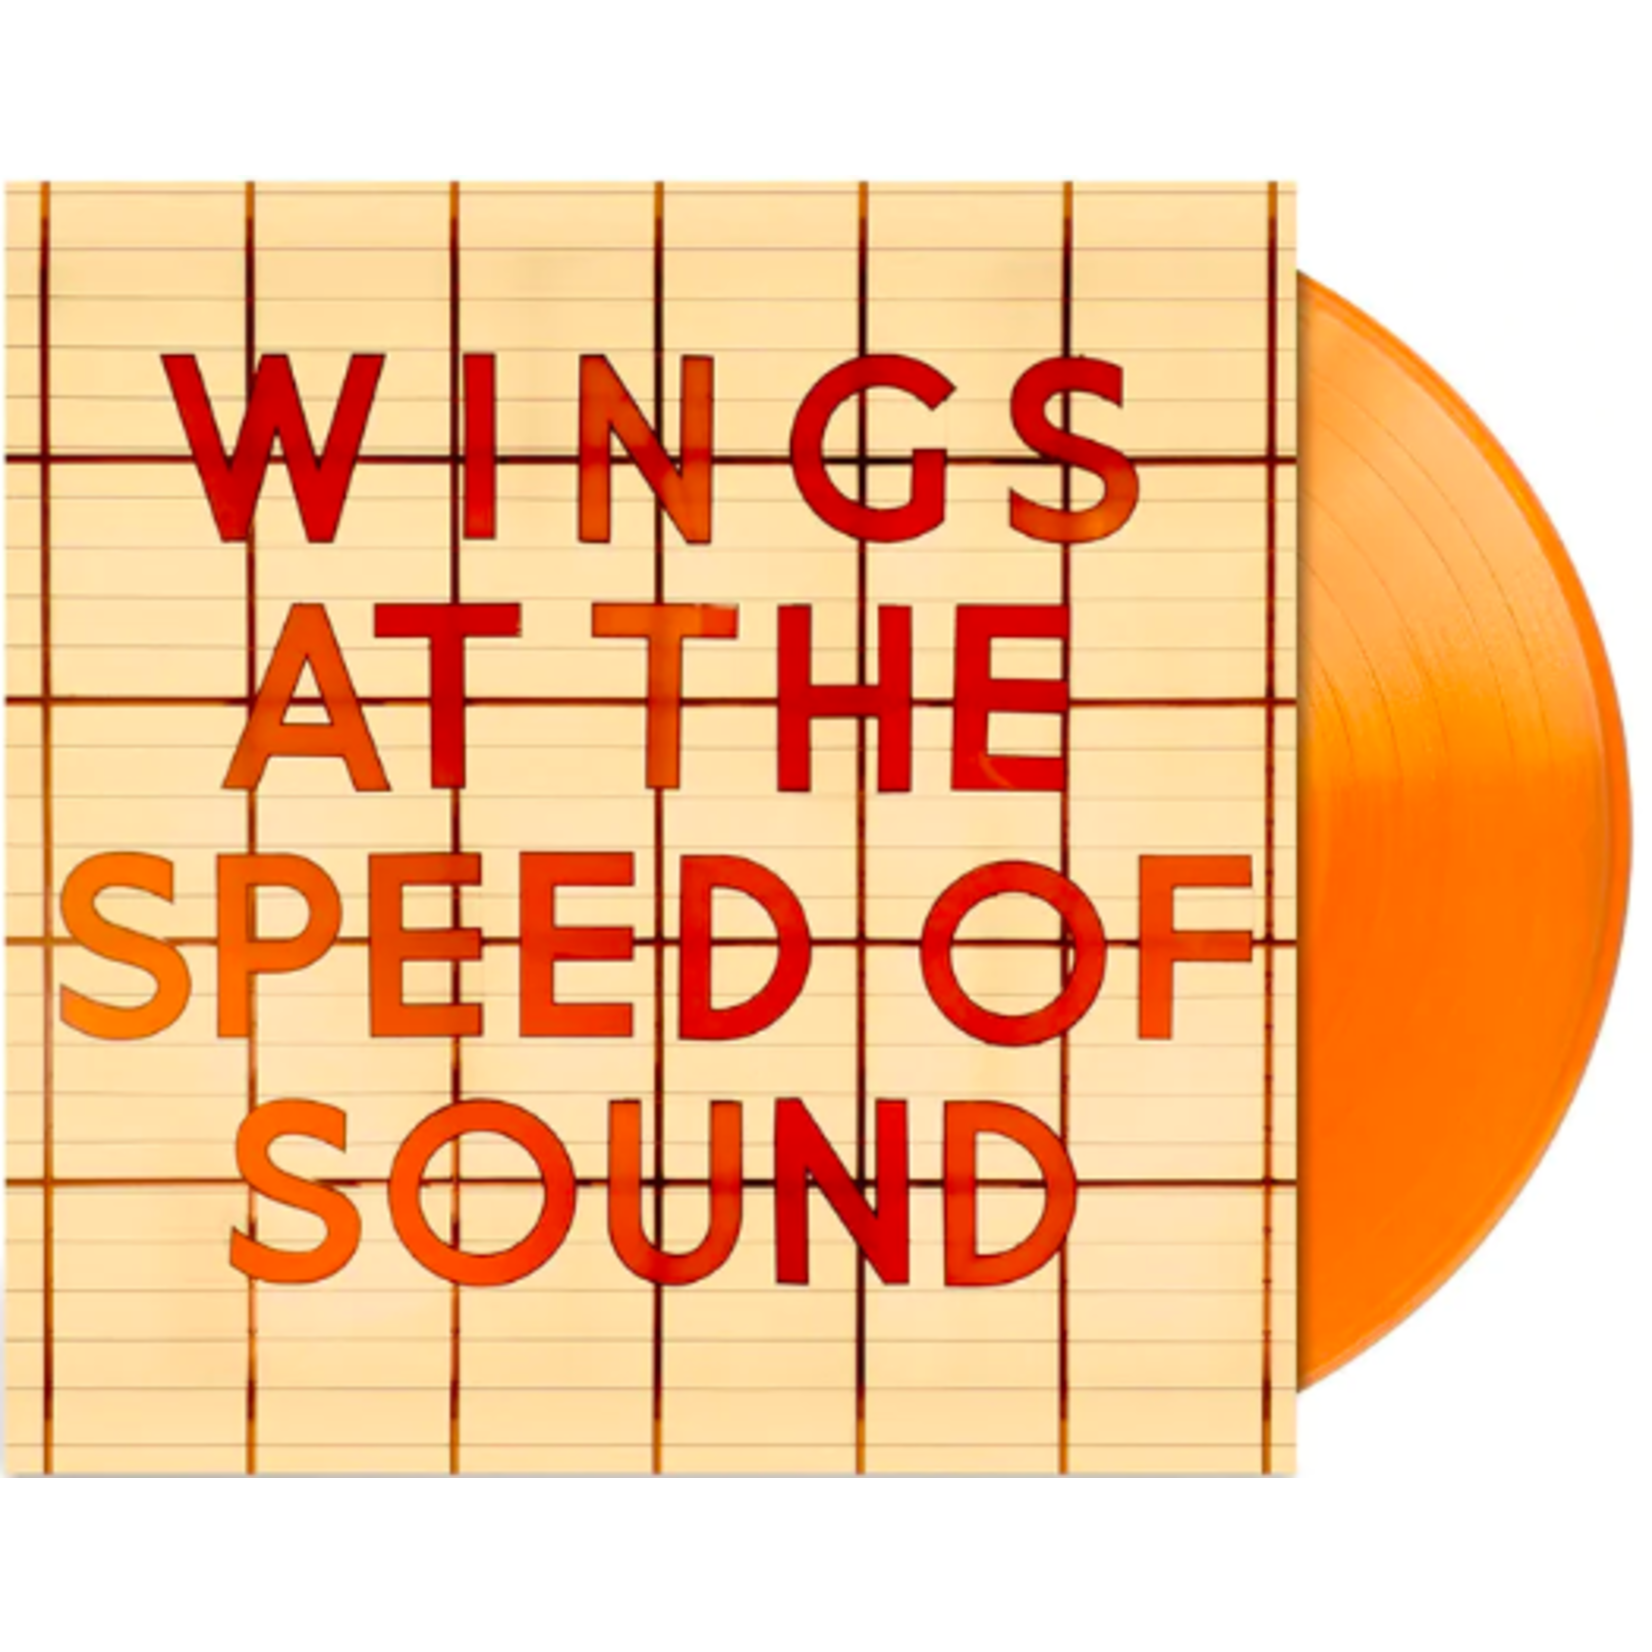 [New] Wings - at the Speed of Sound